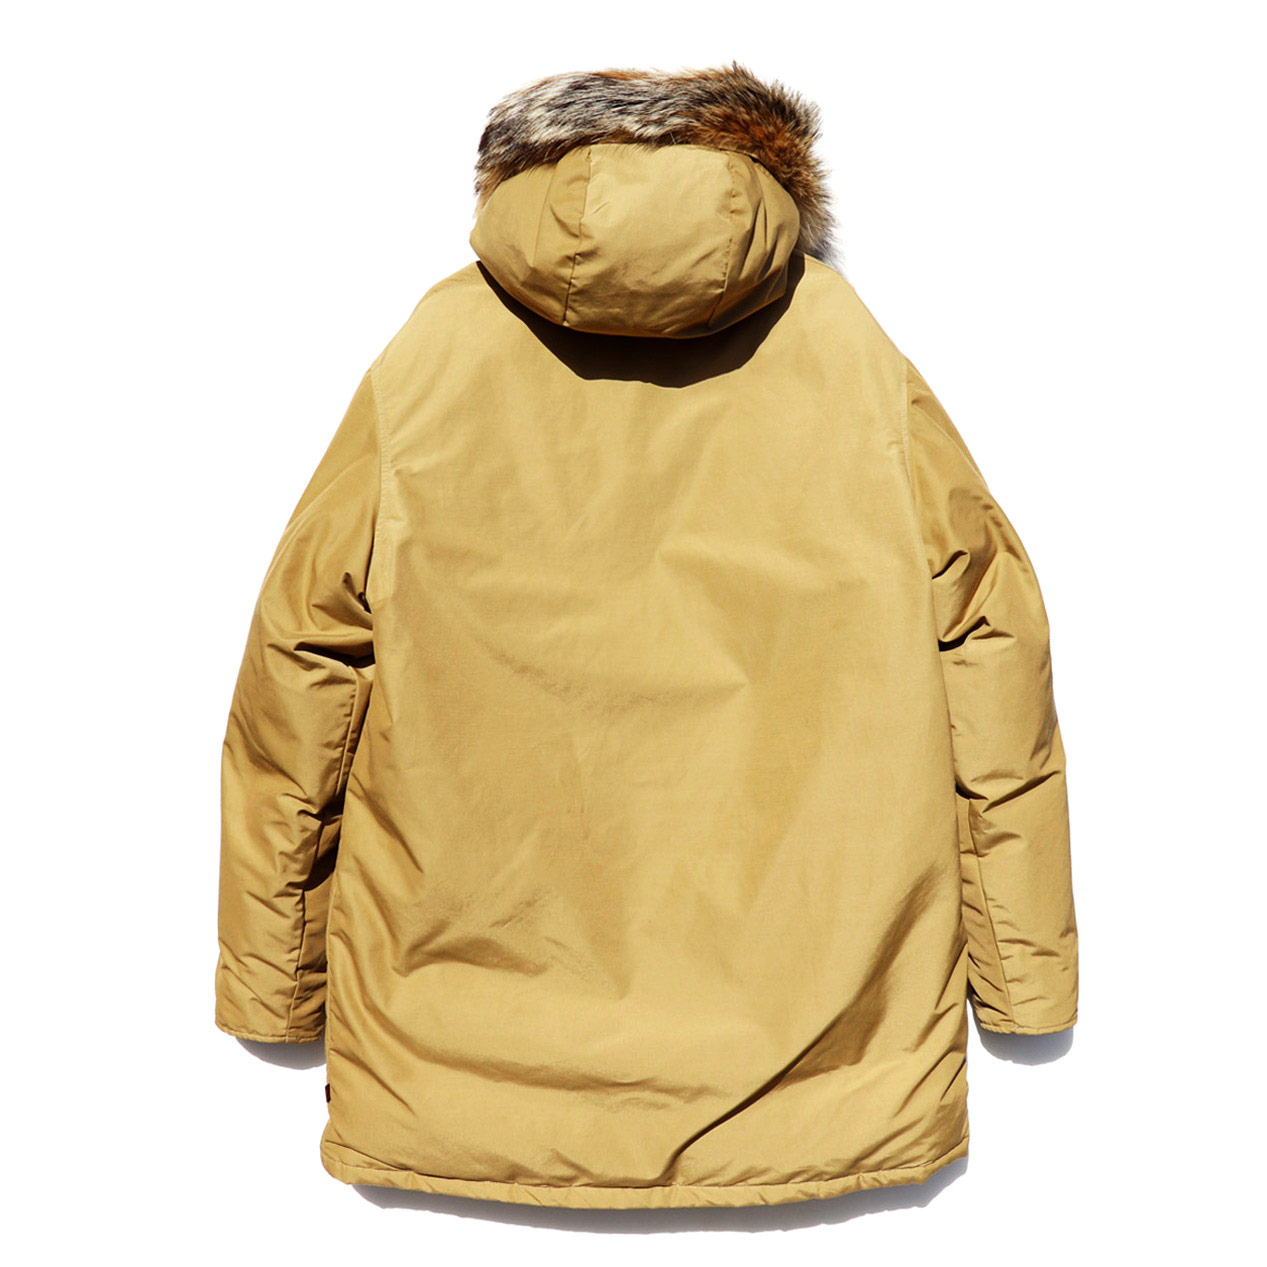 POST JUNK / 90's WOOLRICH USA製 アークティックパーカー ダウン 